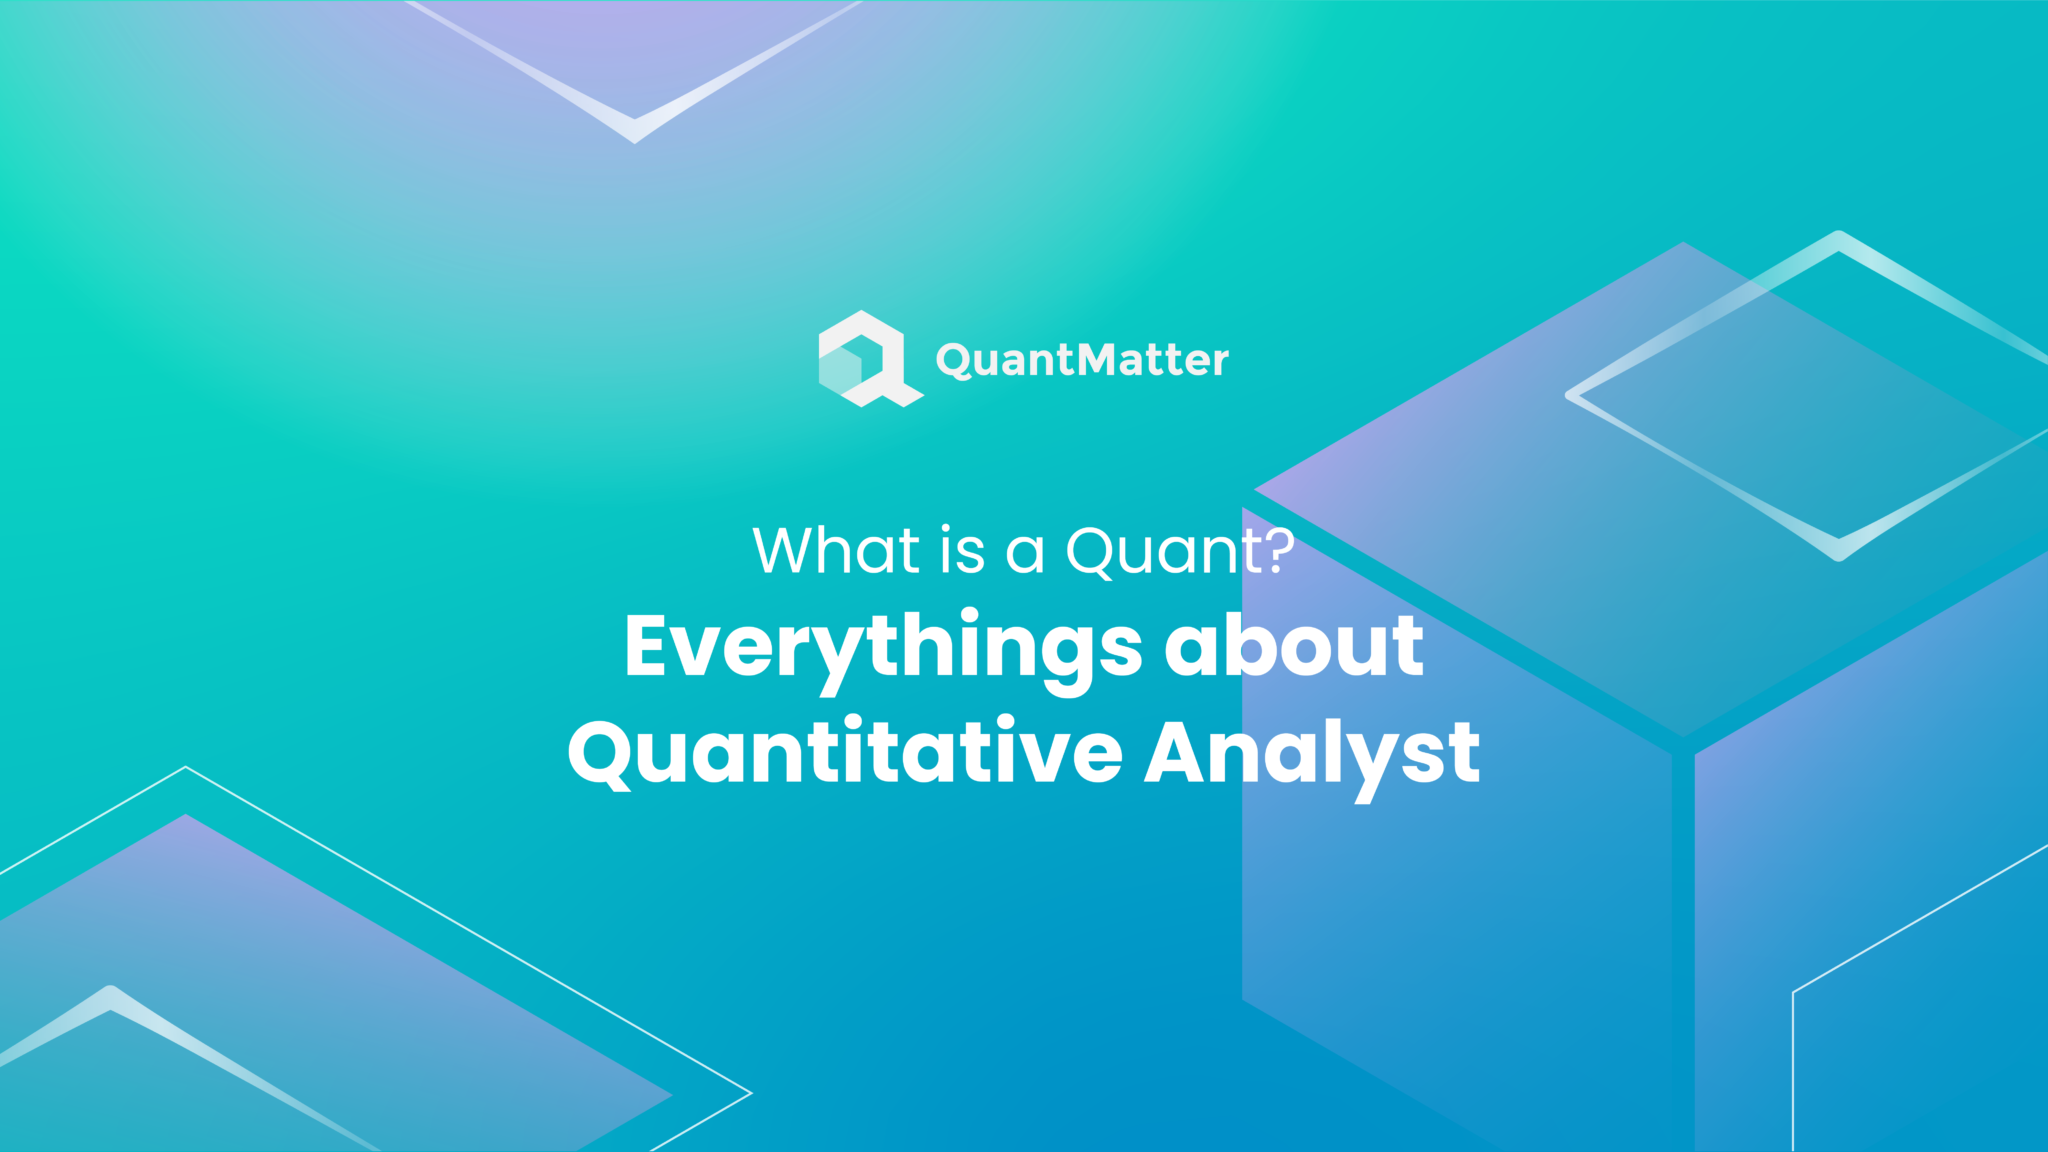 What Is a Quant? Everything about Quantitative Analyst